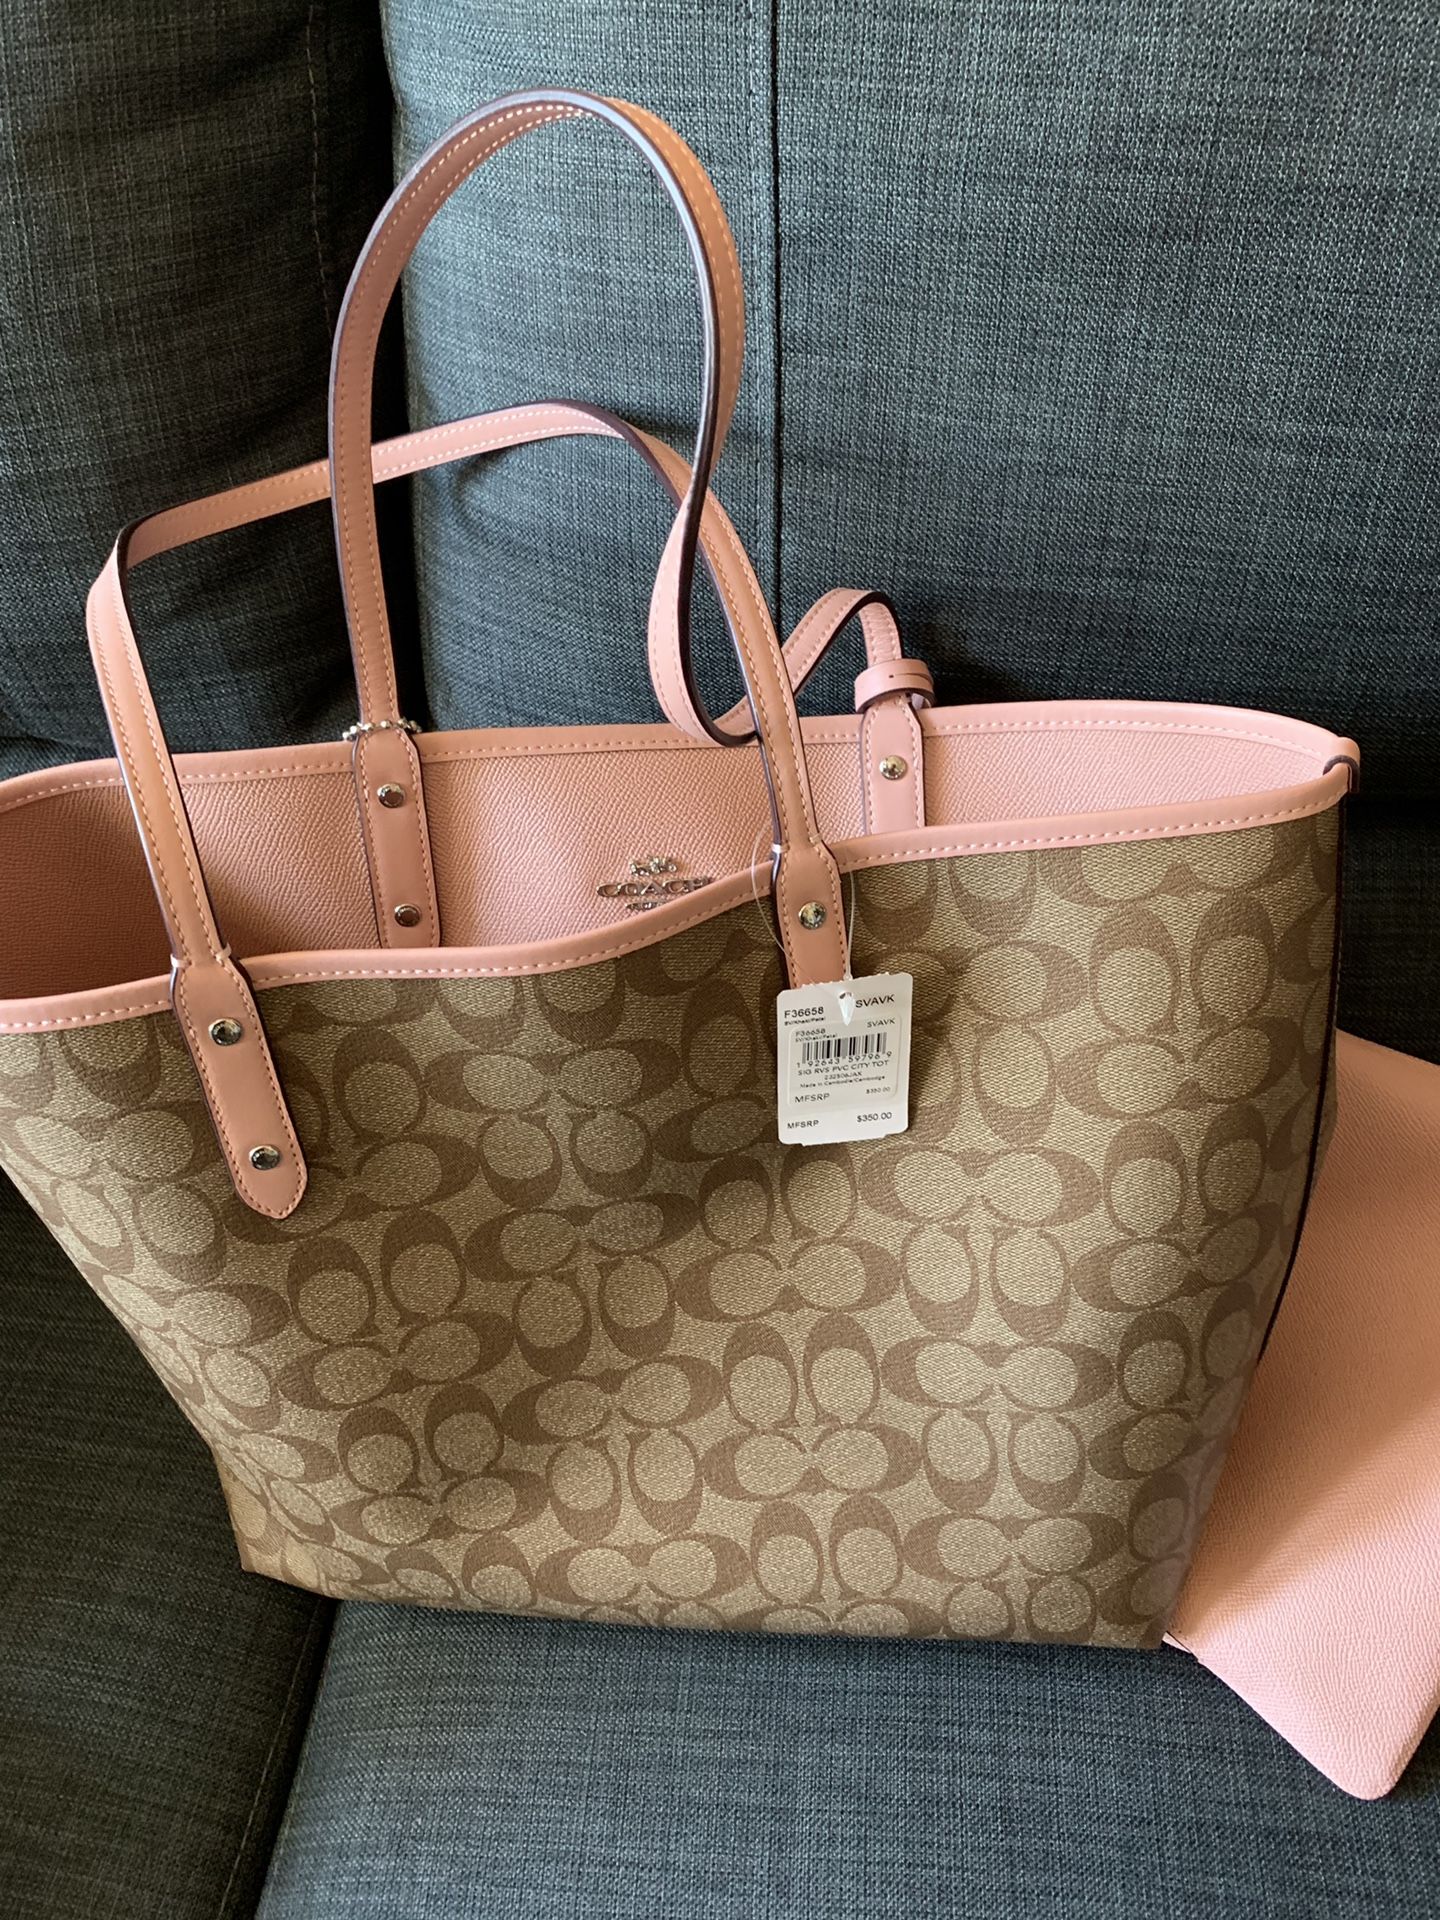 Reversible Tote Bag Coach with wallet